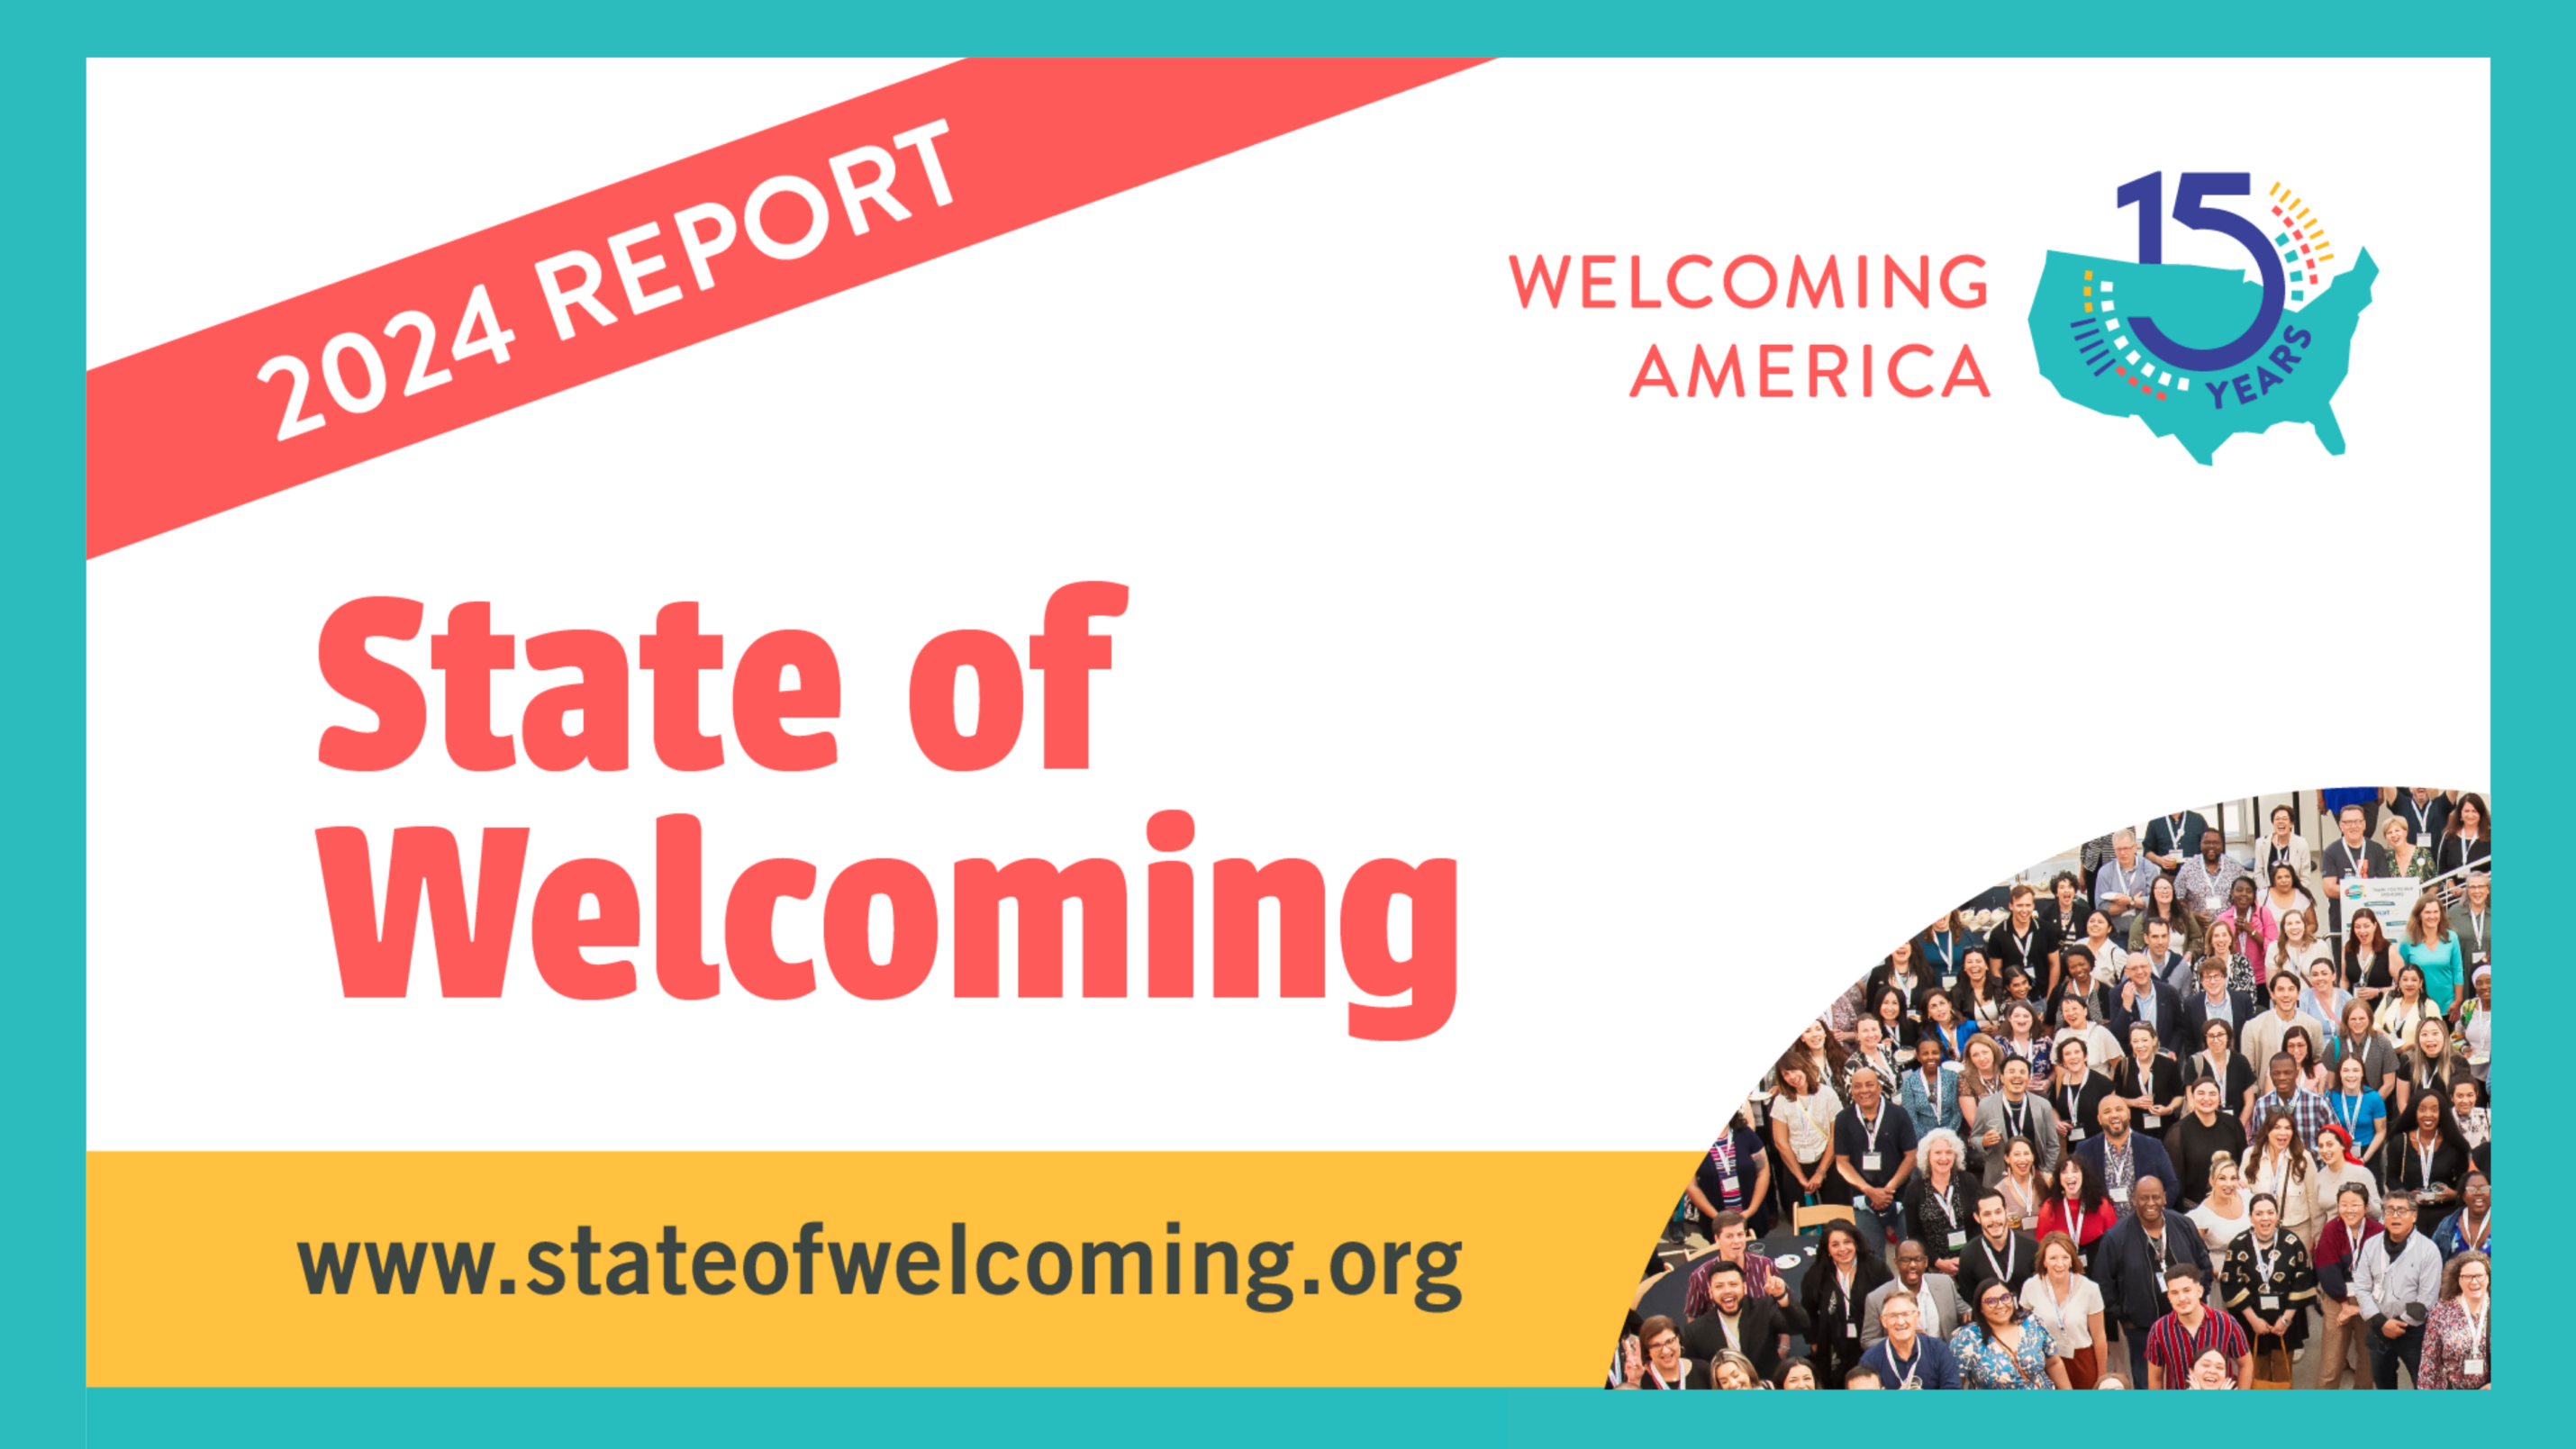 Graphic promoting the State of Welcoming 2024 Report. To access the digital report, visit www.stateofwelcoming.org